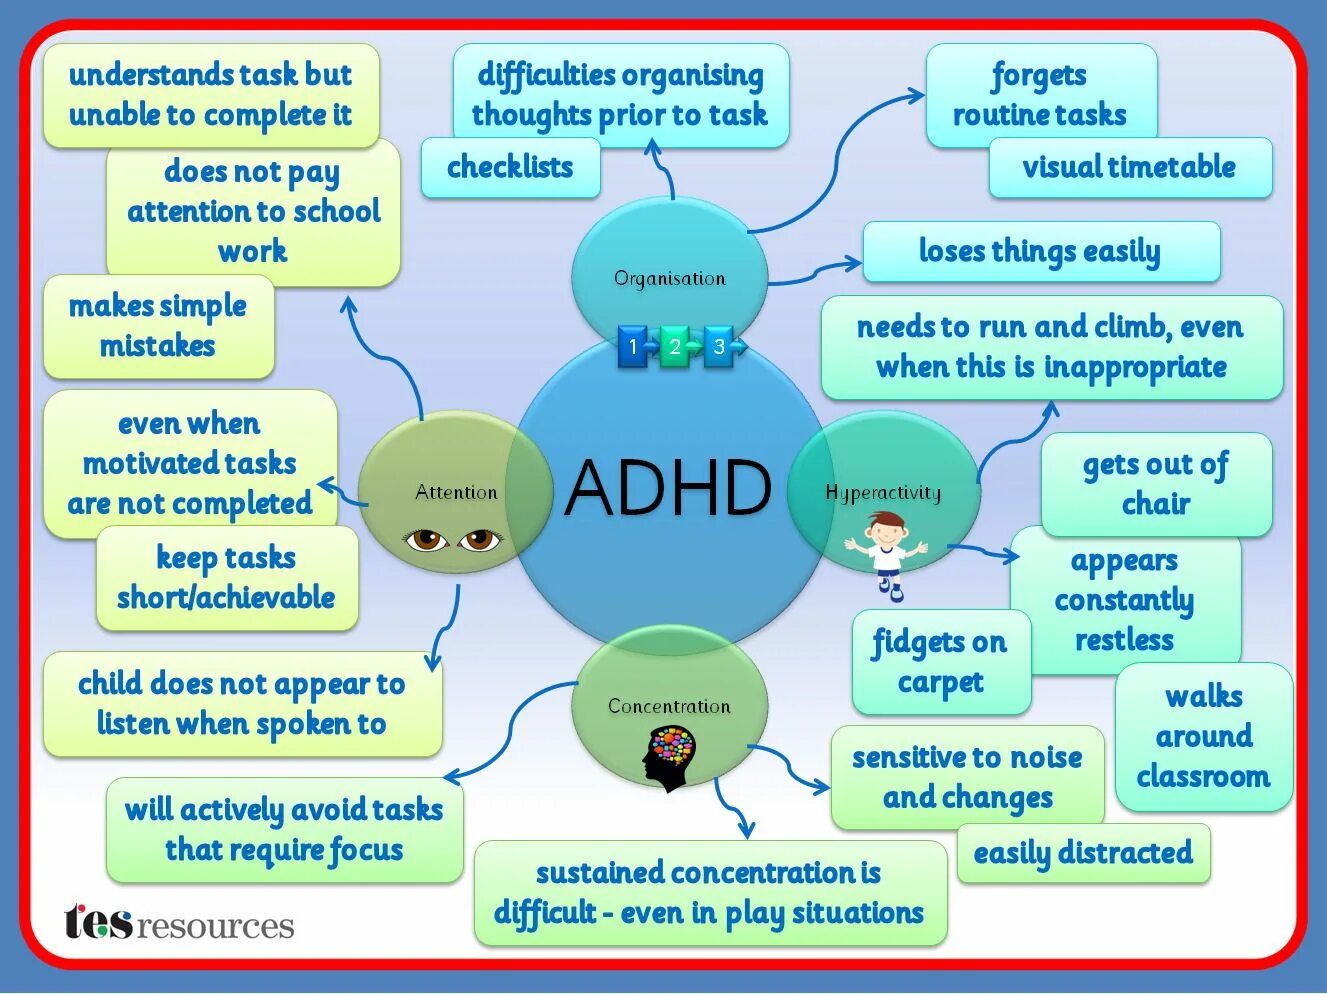 Attention-deficit/hyperactivity Disorder (ADHD). Add and ADHD. Визуал школьного проекта. Short attention. Attention disorders